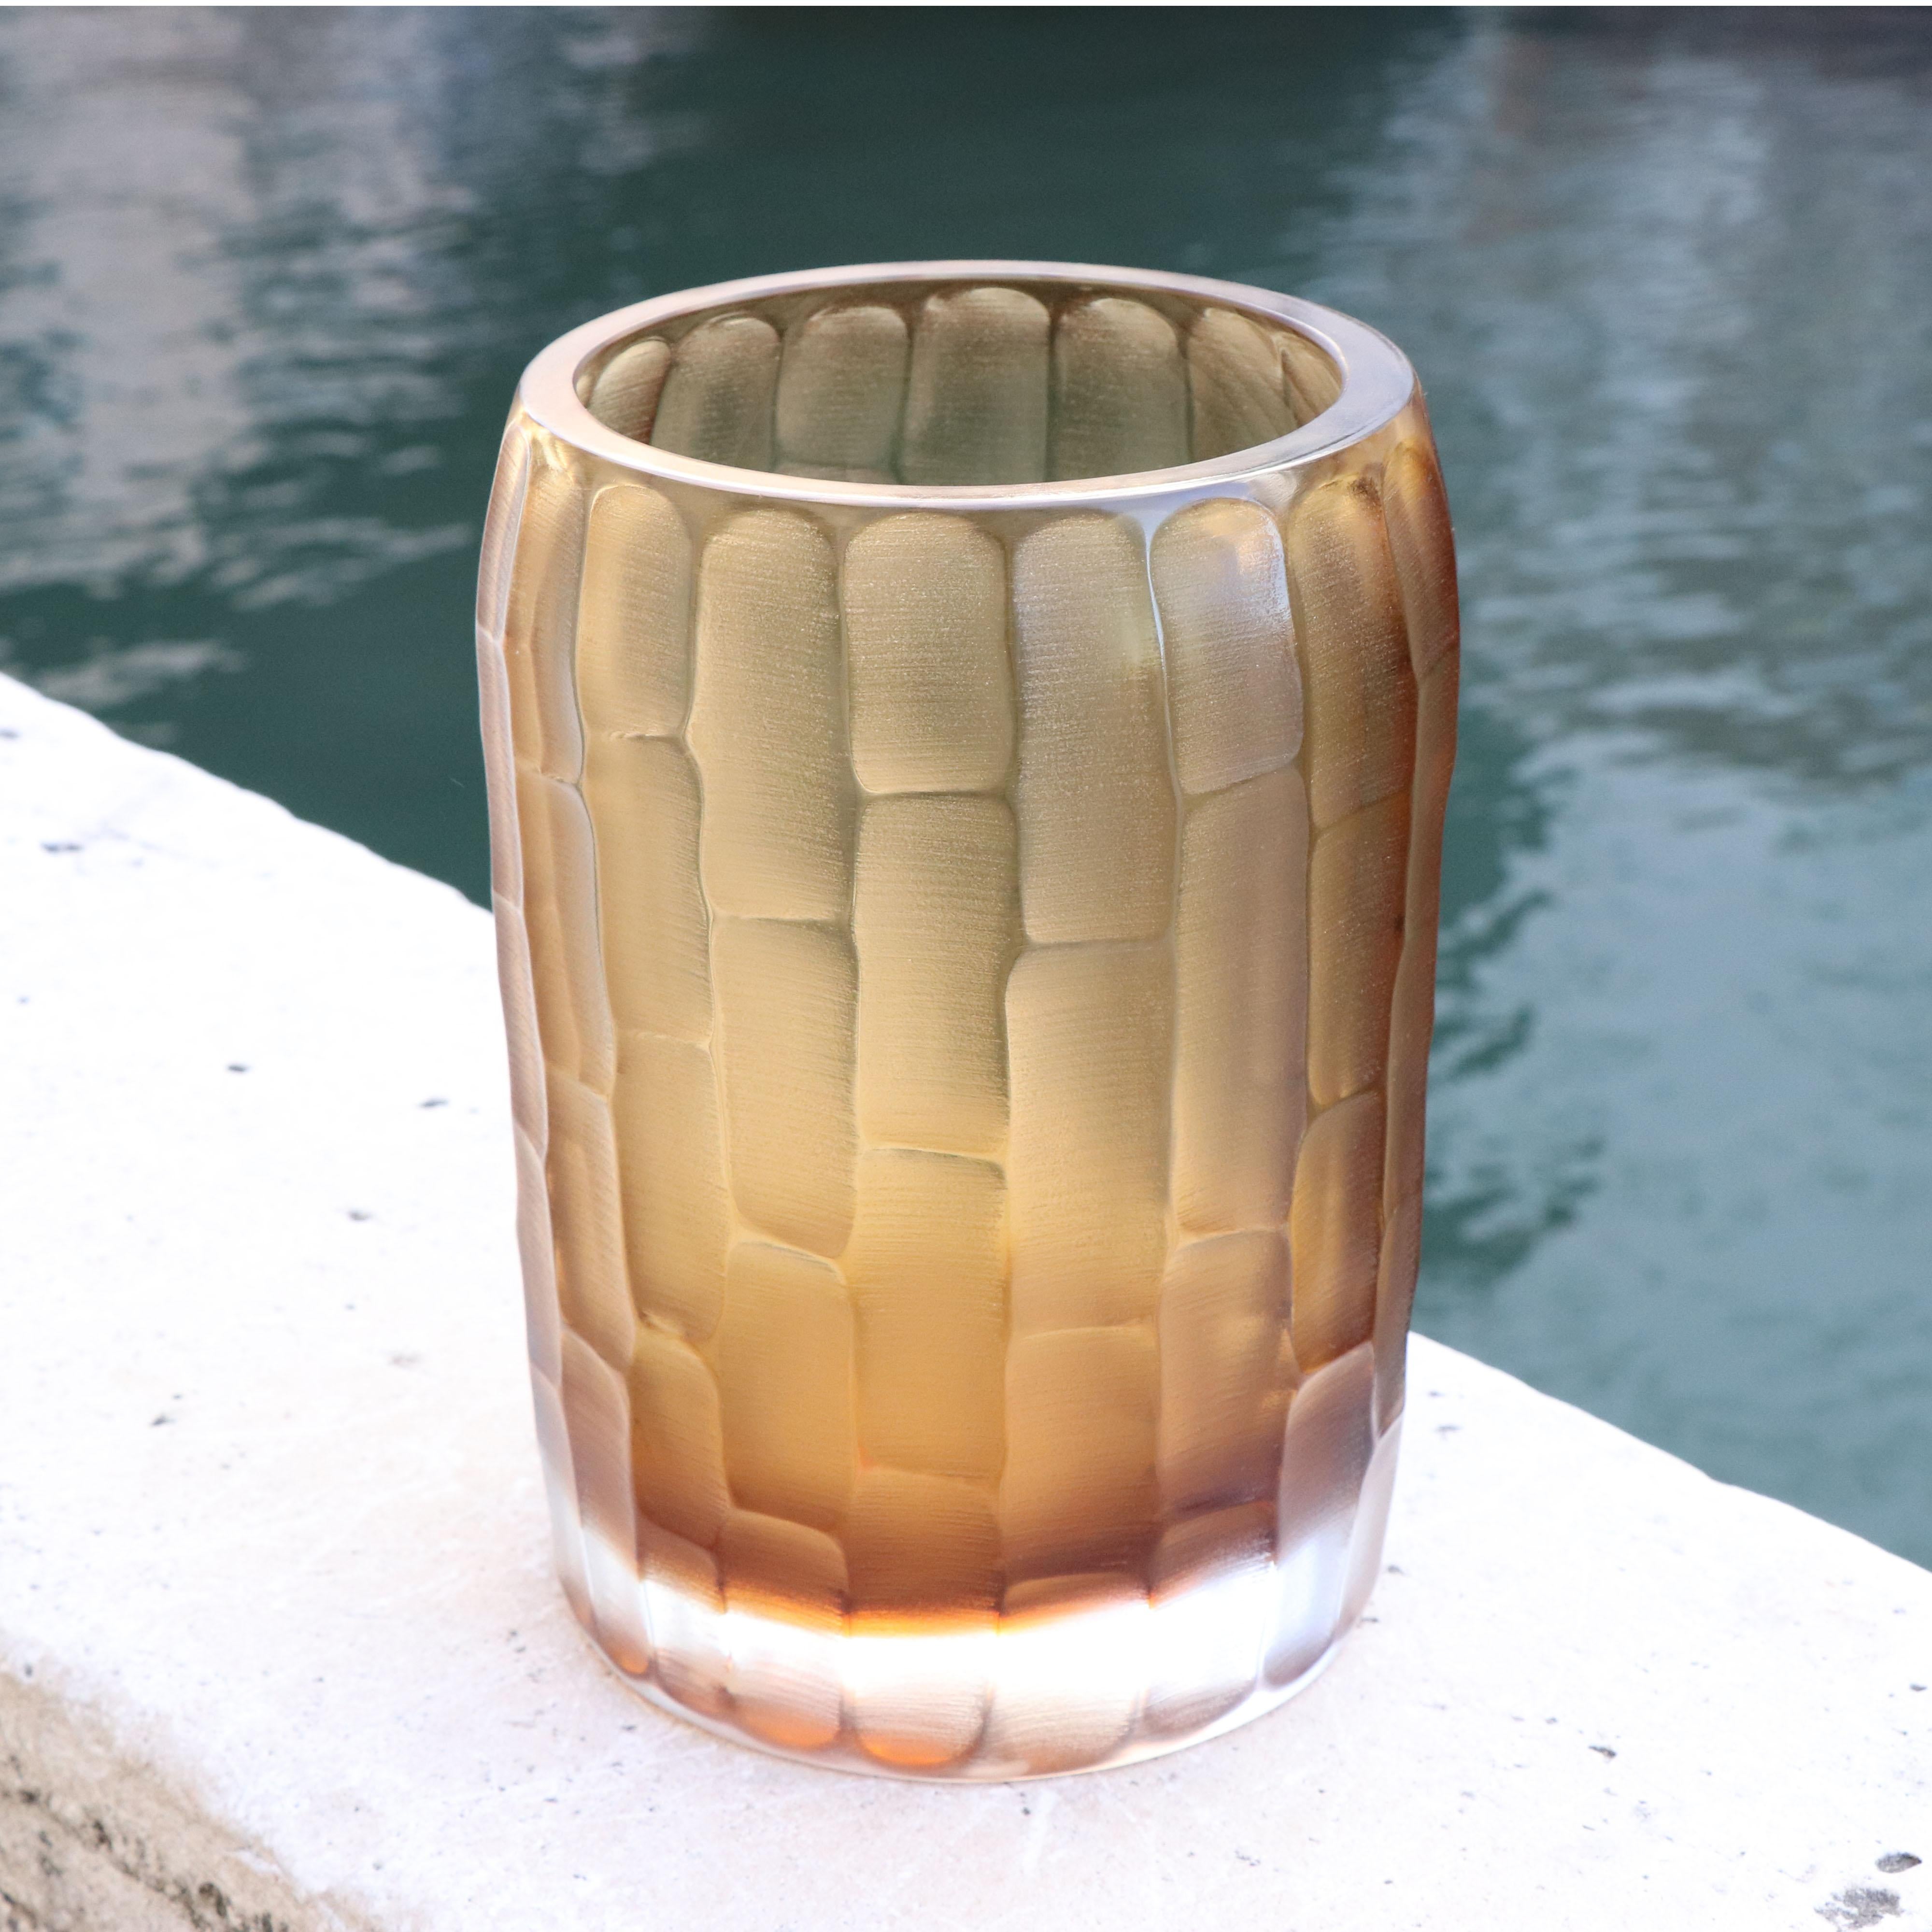 The name Rullo evokes the act of rolling the heated glass on the blow pipe. This small vase is first shaped by blowing the molten glass and further modelled by carving the surface once cooled. The vibrations of the light on the etched surface are